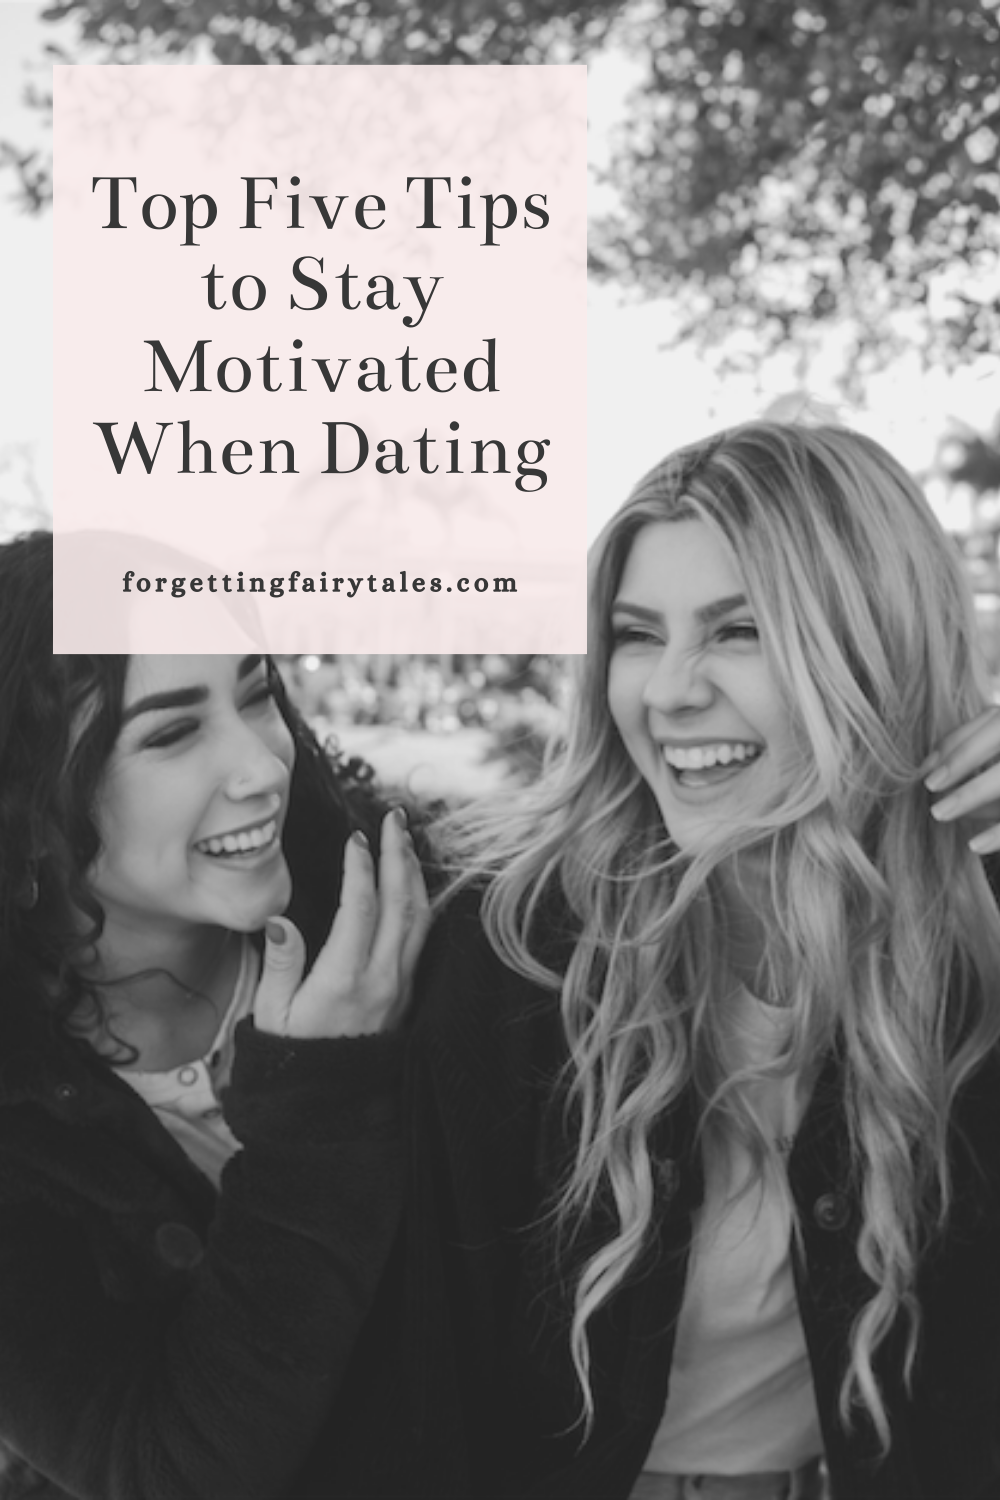 Top Five Tips to Stay Motivated When Dating - Forgetting Fairytales